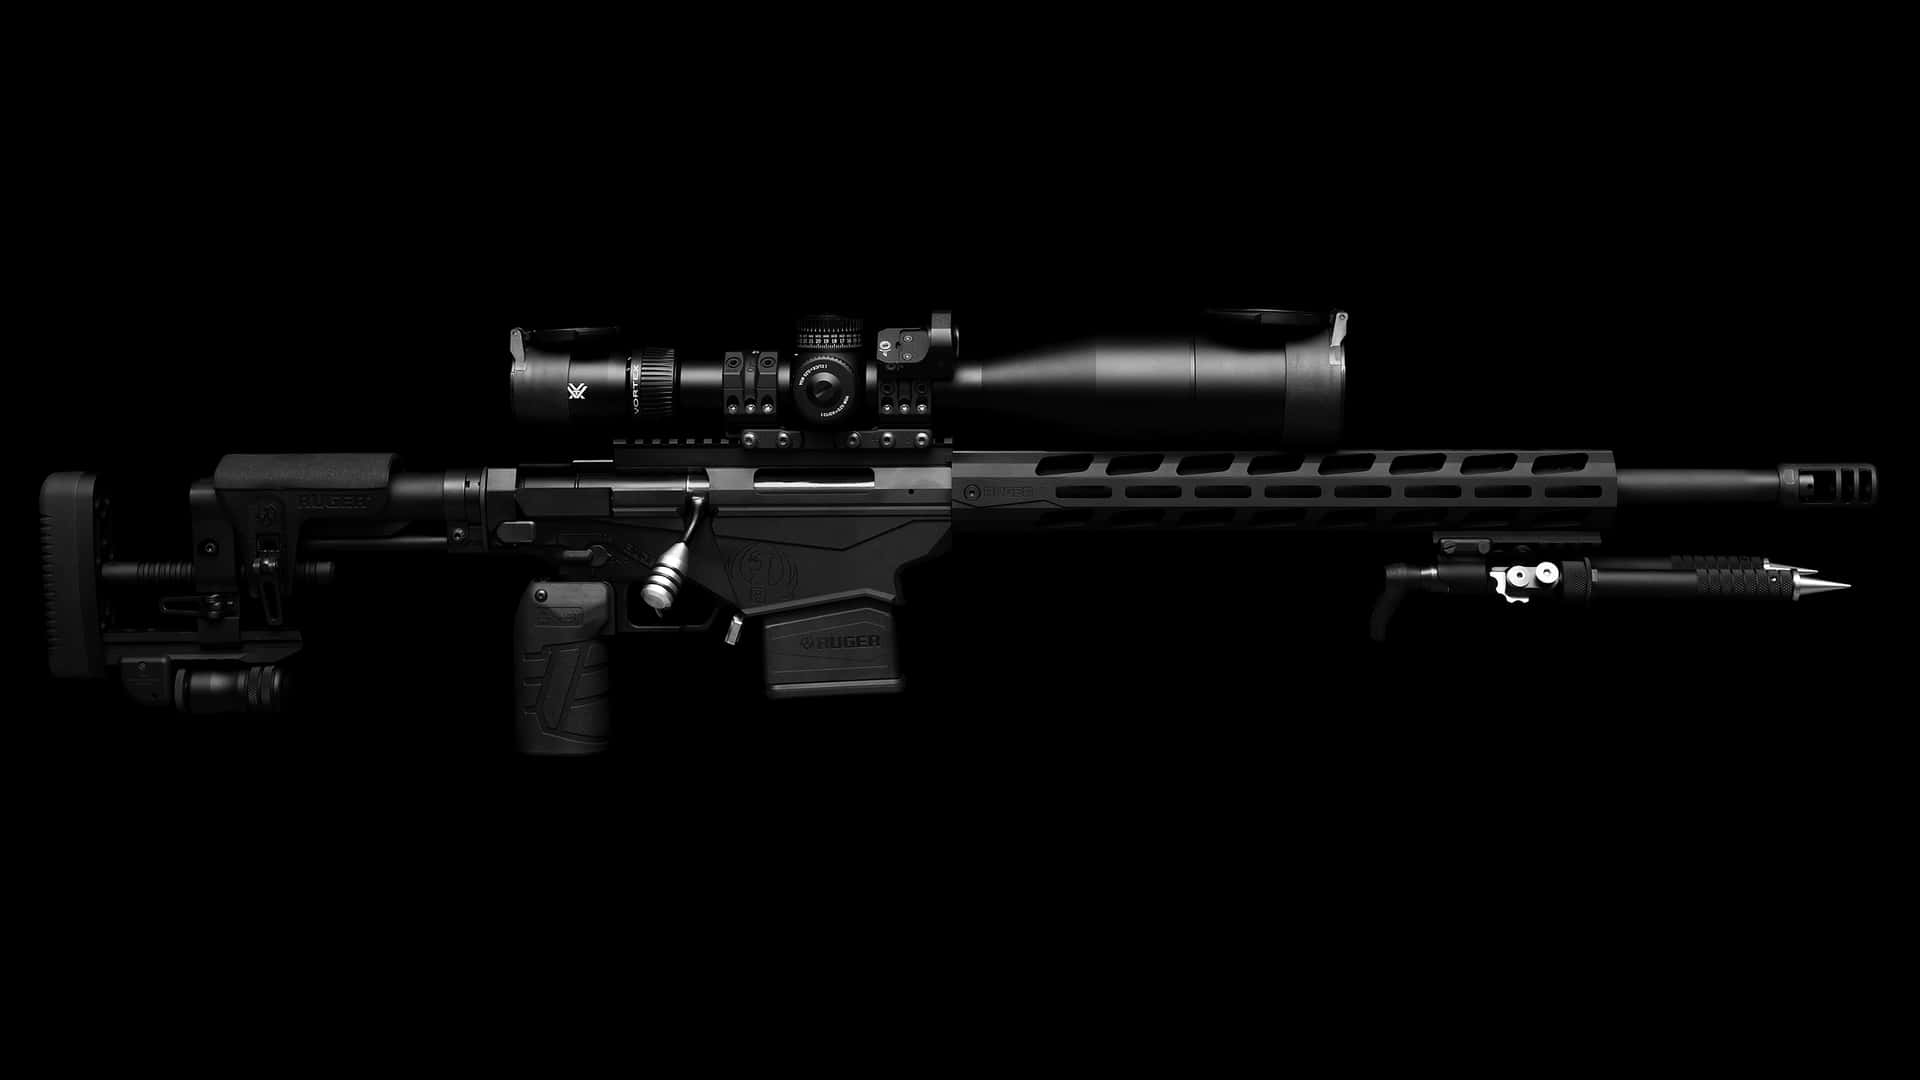 Precise Ruger Rifle Wallpaper